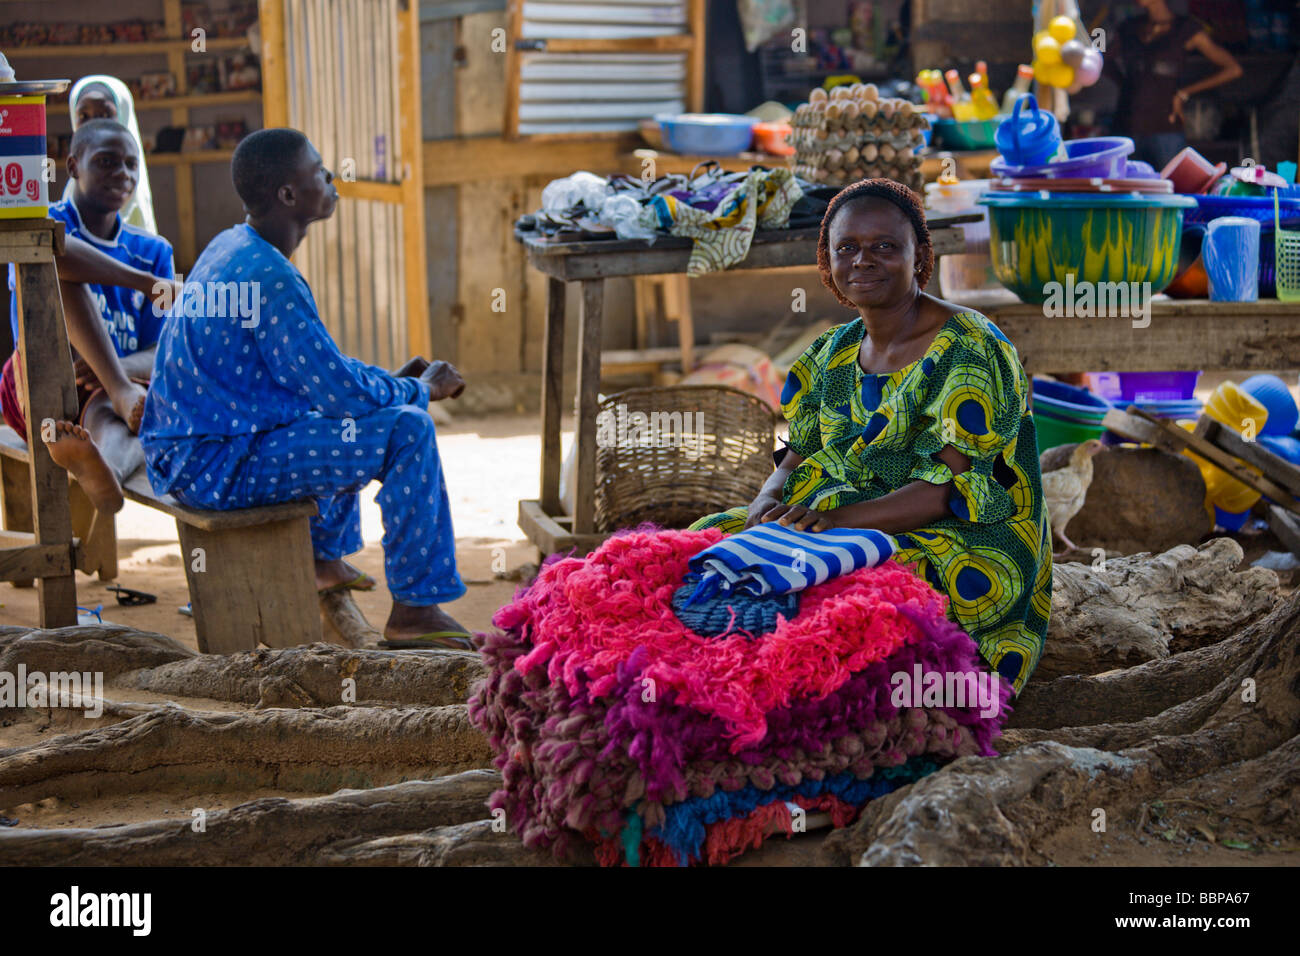 A woman sells colorful hand-knitted cloth in Abuja, Nigeria. Stock Photo